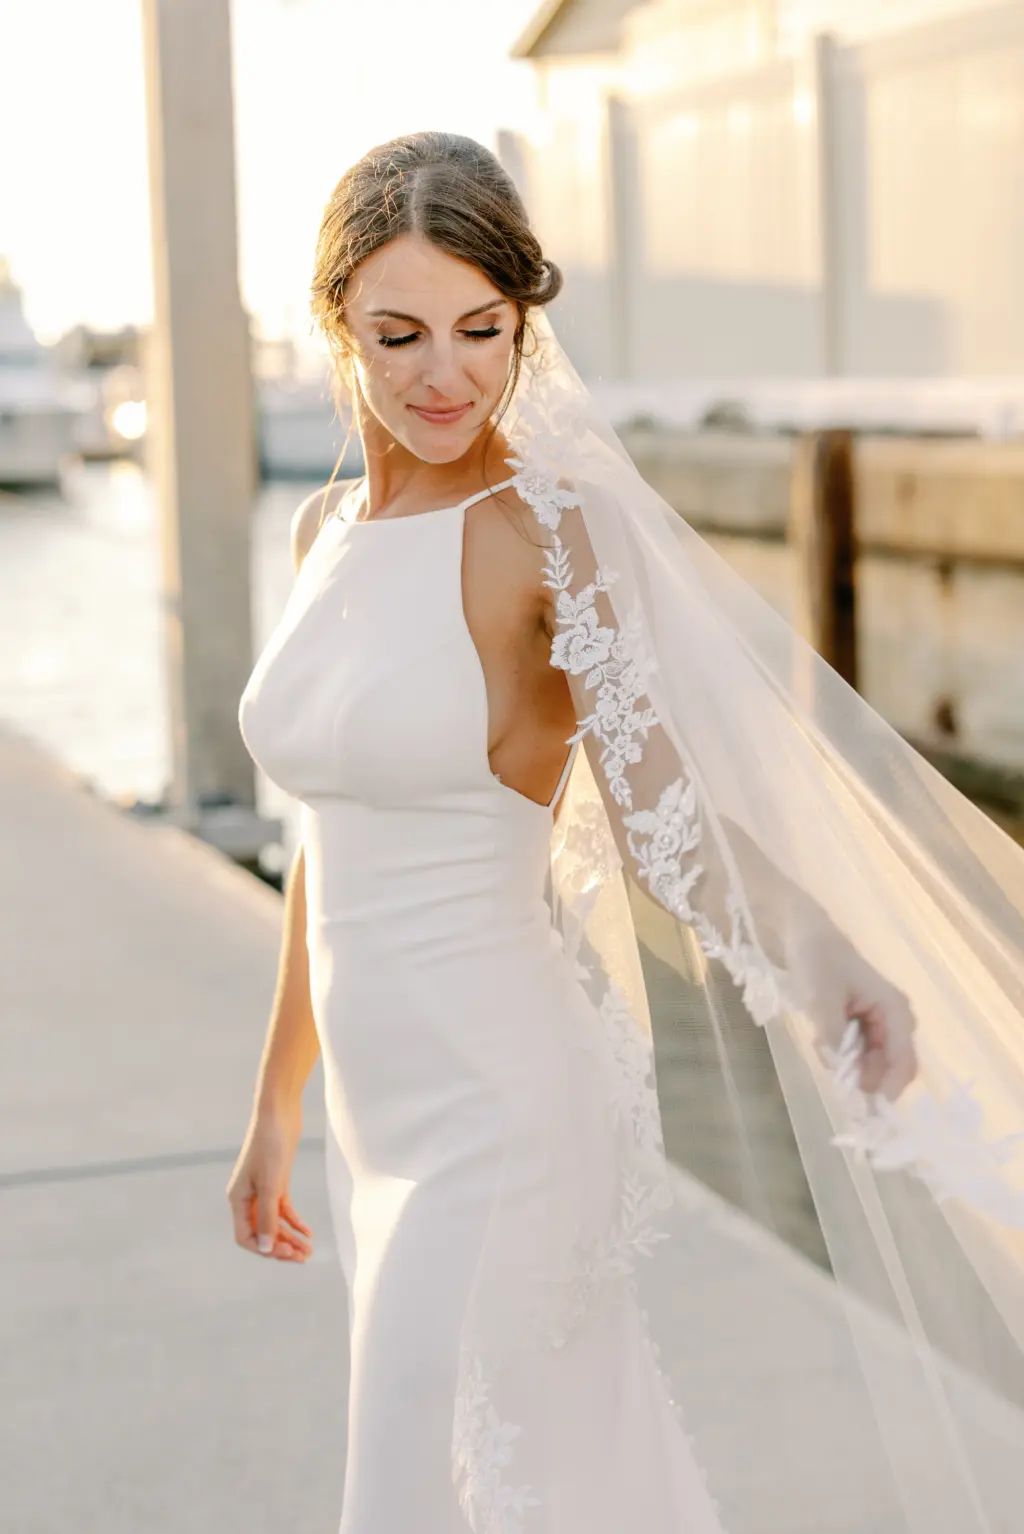 Bride with Classic Updo and Soft Glam Makeup Bridal Portrait | Tampa Hair and Makeup Artist Femme Akoi